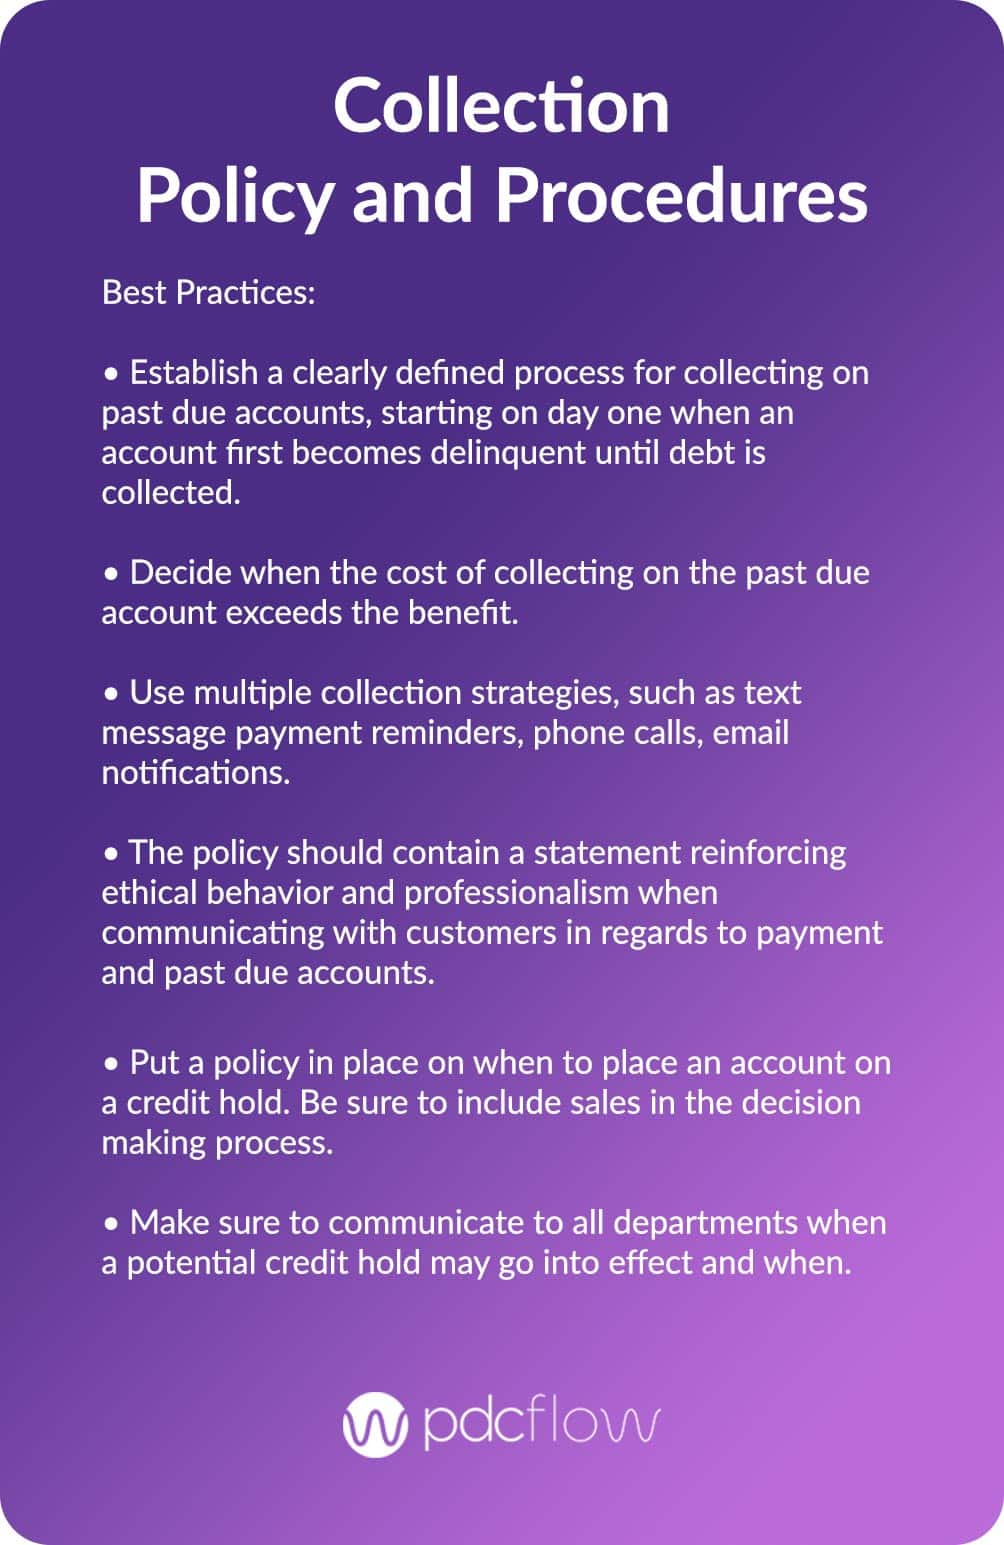 Collection Policy and Procedures